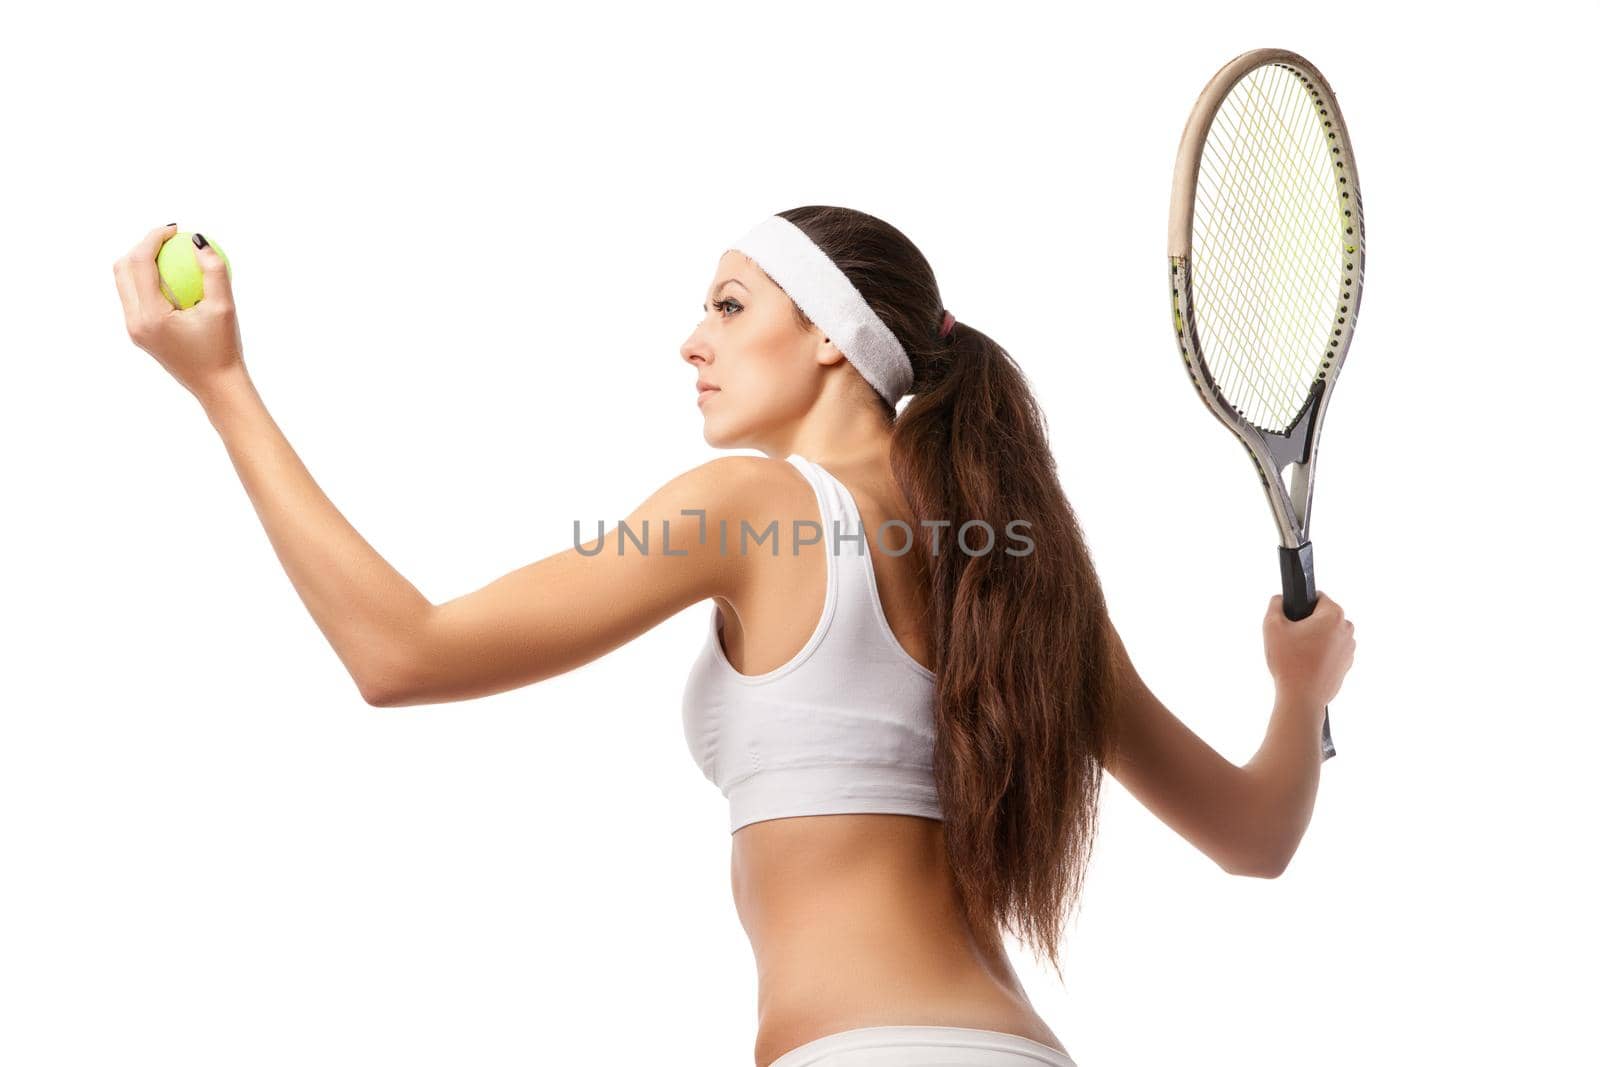 Adult woman playing tennis and showing her back. Studio shot over white.